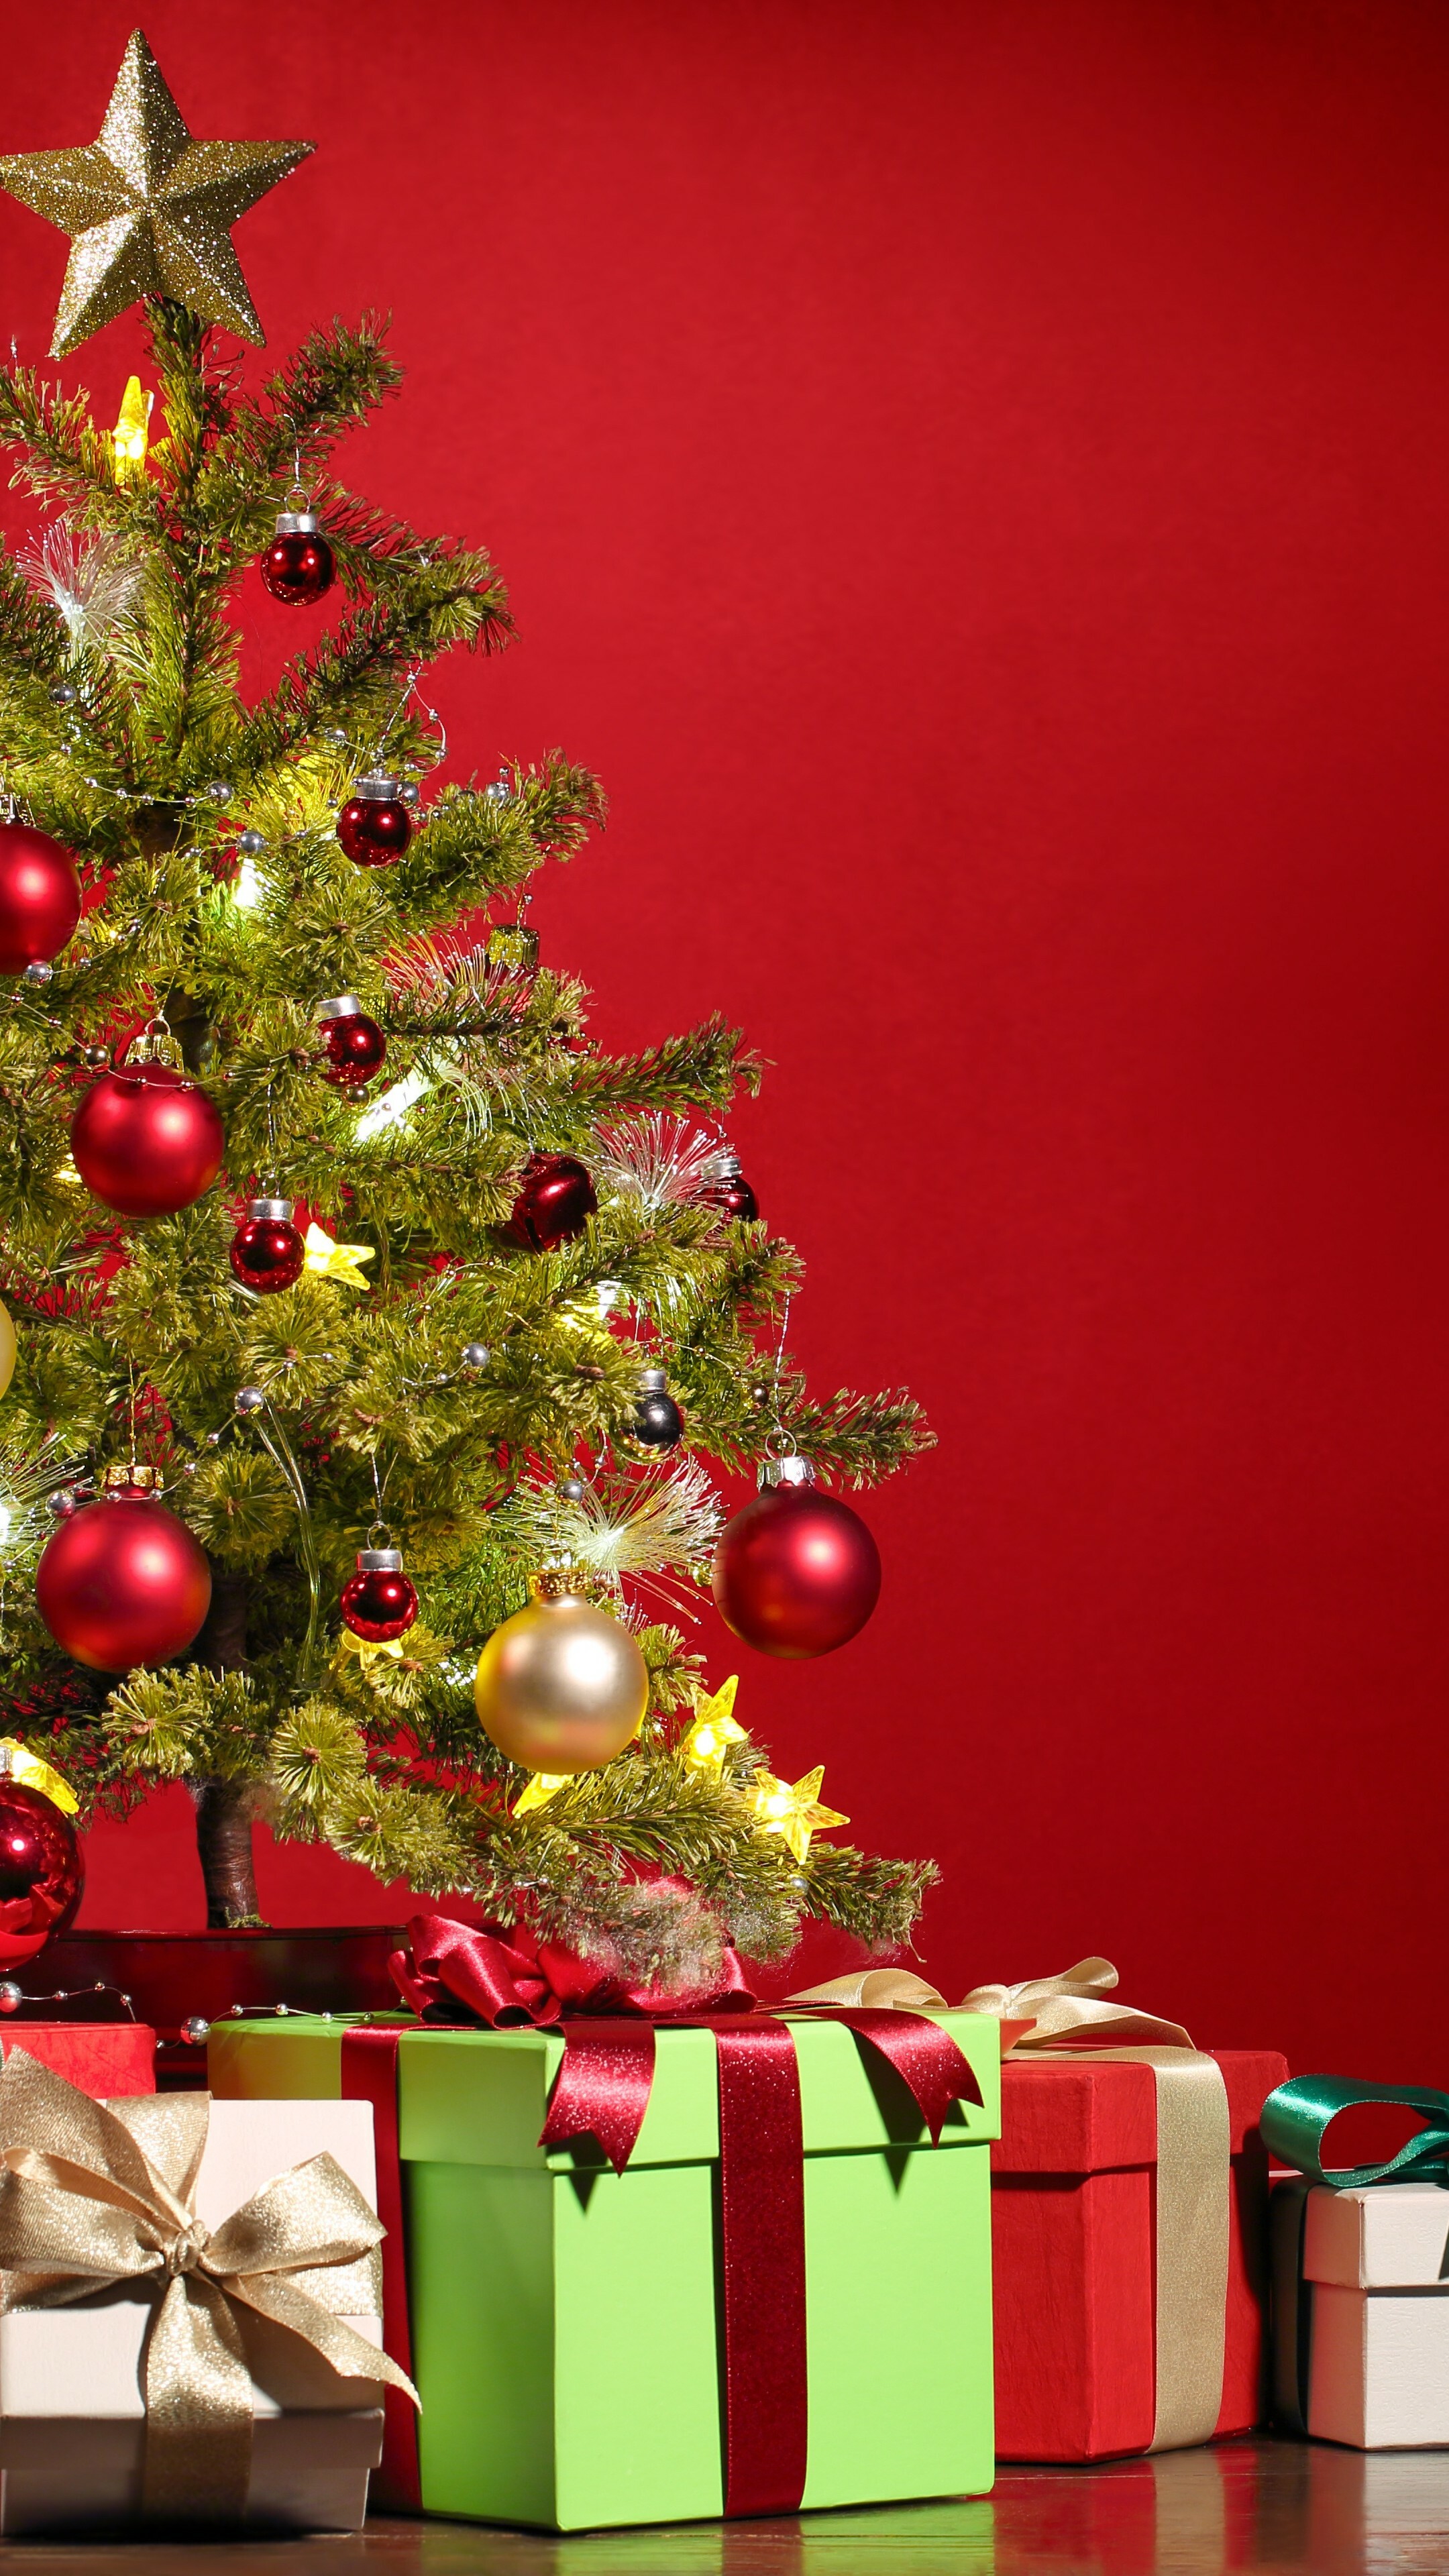 Christmas Tree: New Year, Gifts, Holidays, An star at the top represents the Star of Bethlehem. 2160x3840 4K Wallpaper.